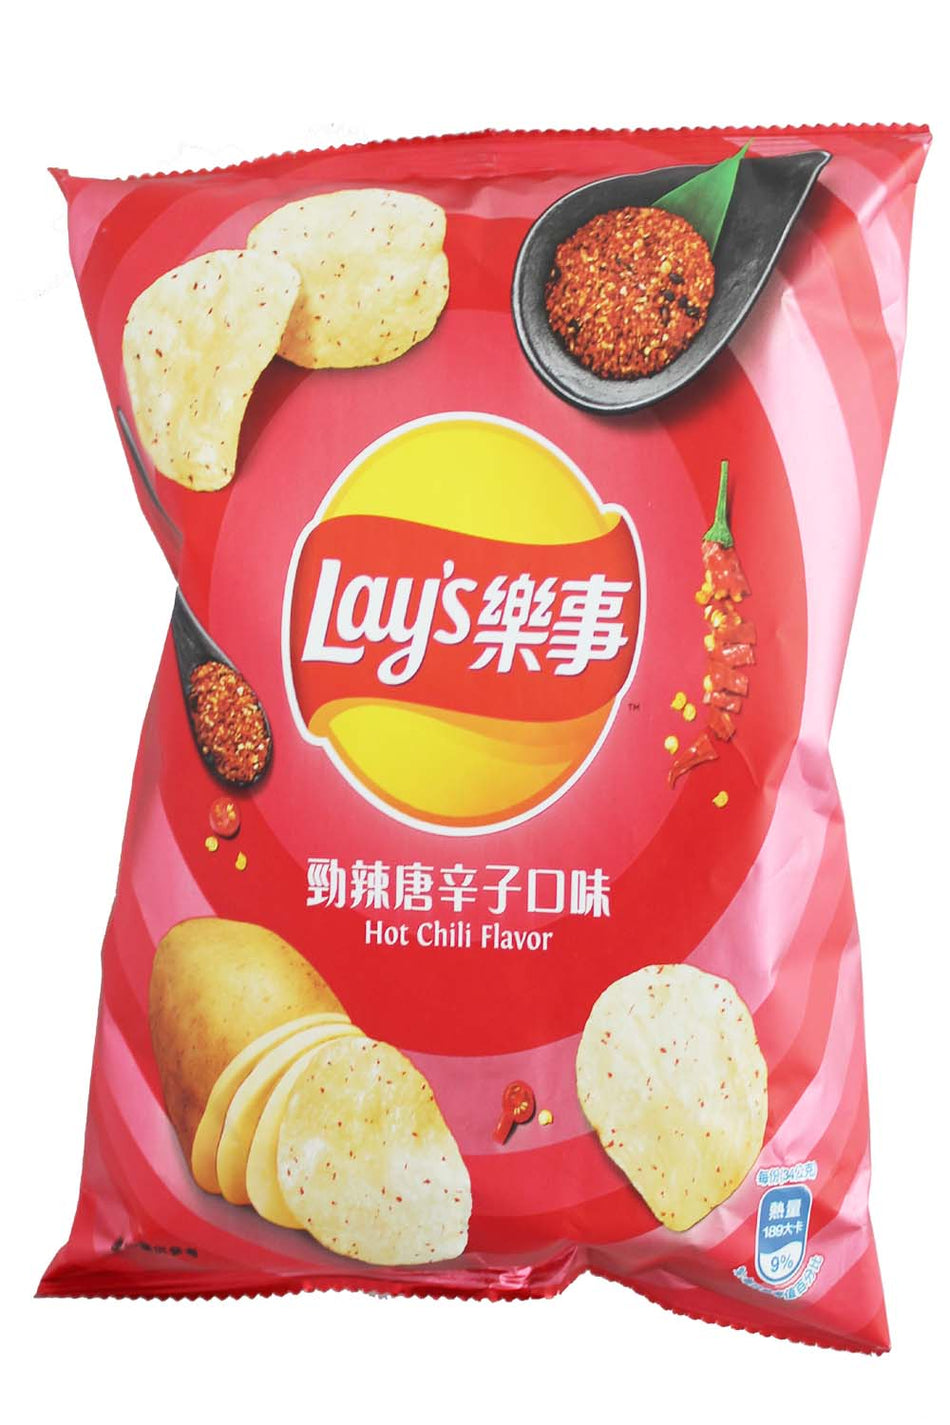 Lay's Hot Chili Flavored Chips